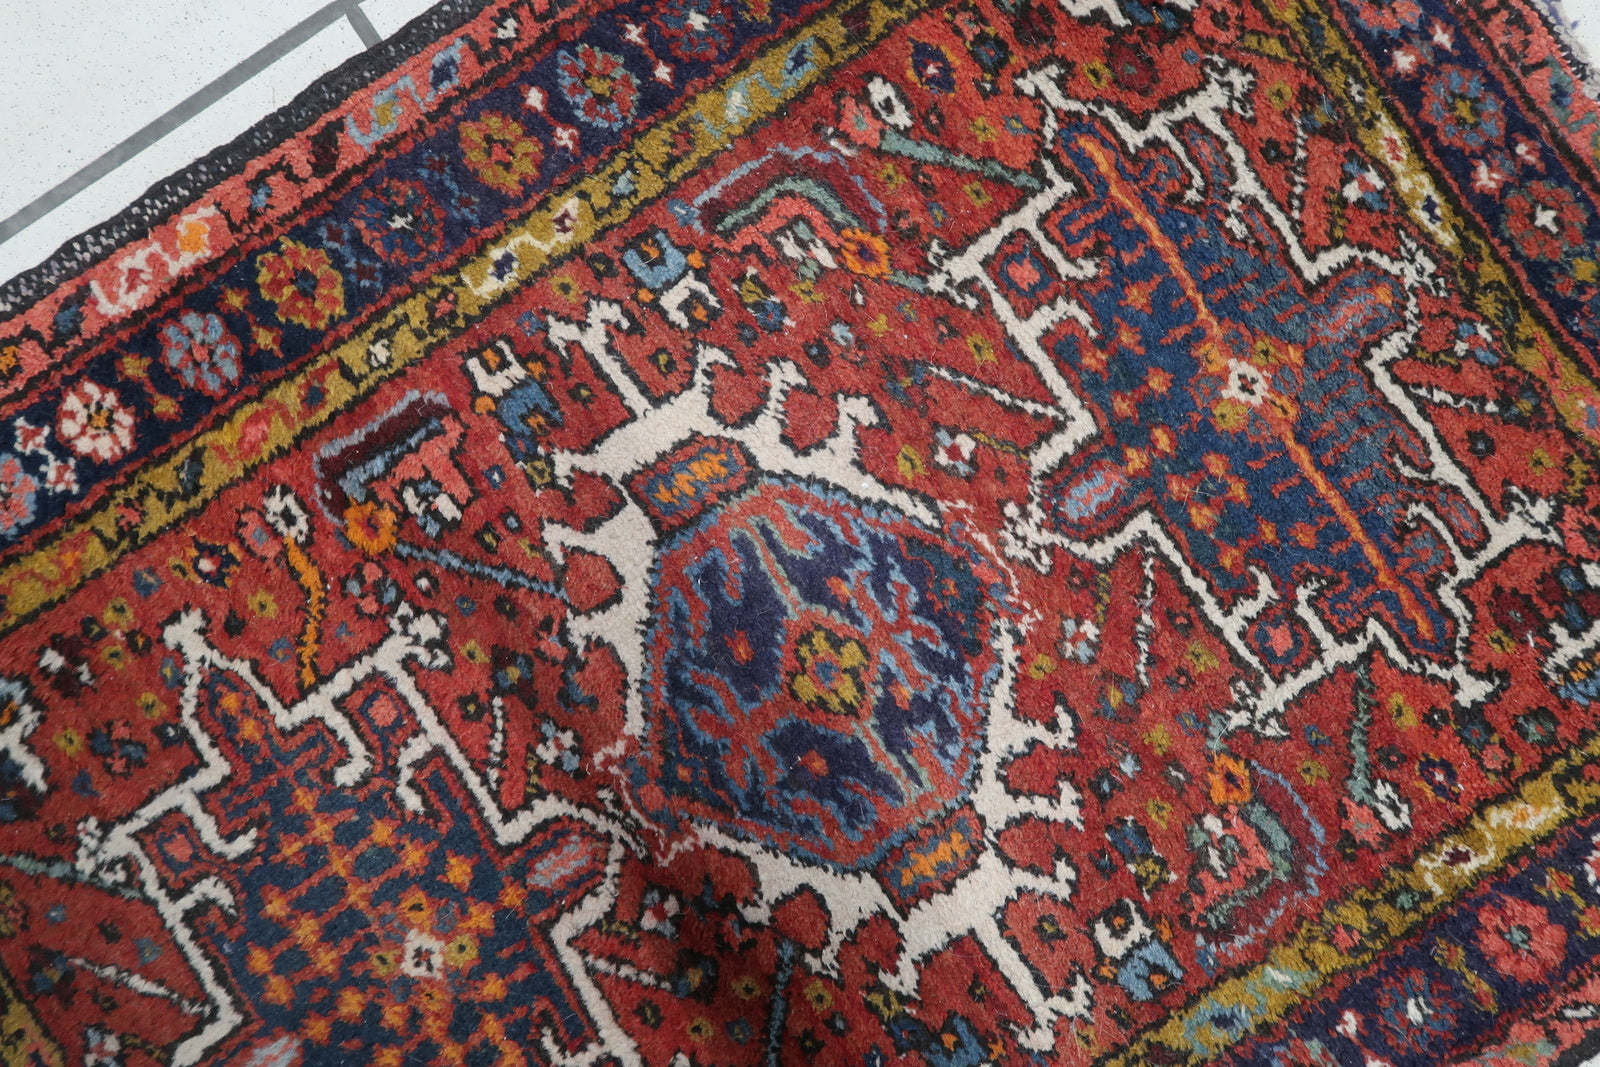 Close-up of the intricate weaving technique on the Handmade Antique Persian Karajeh Rug